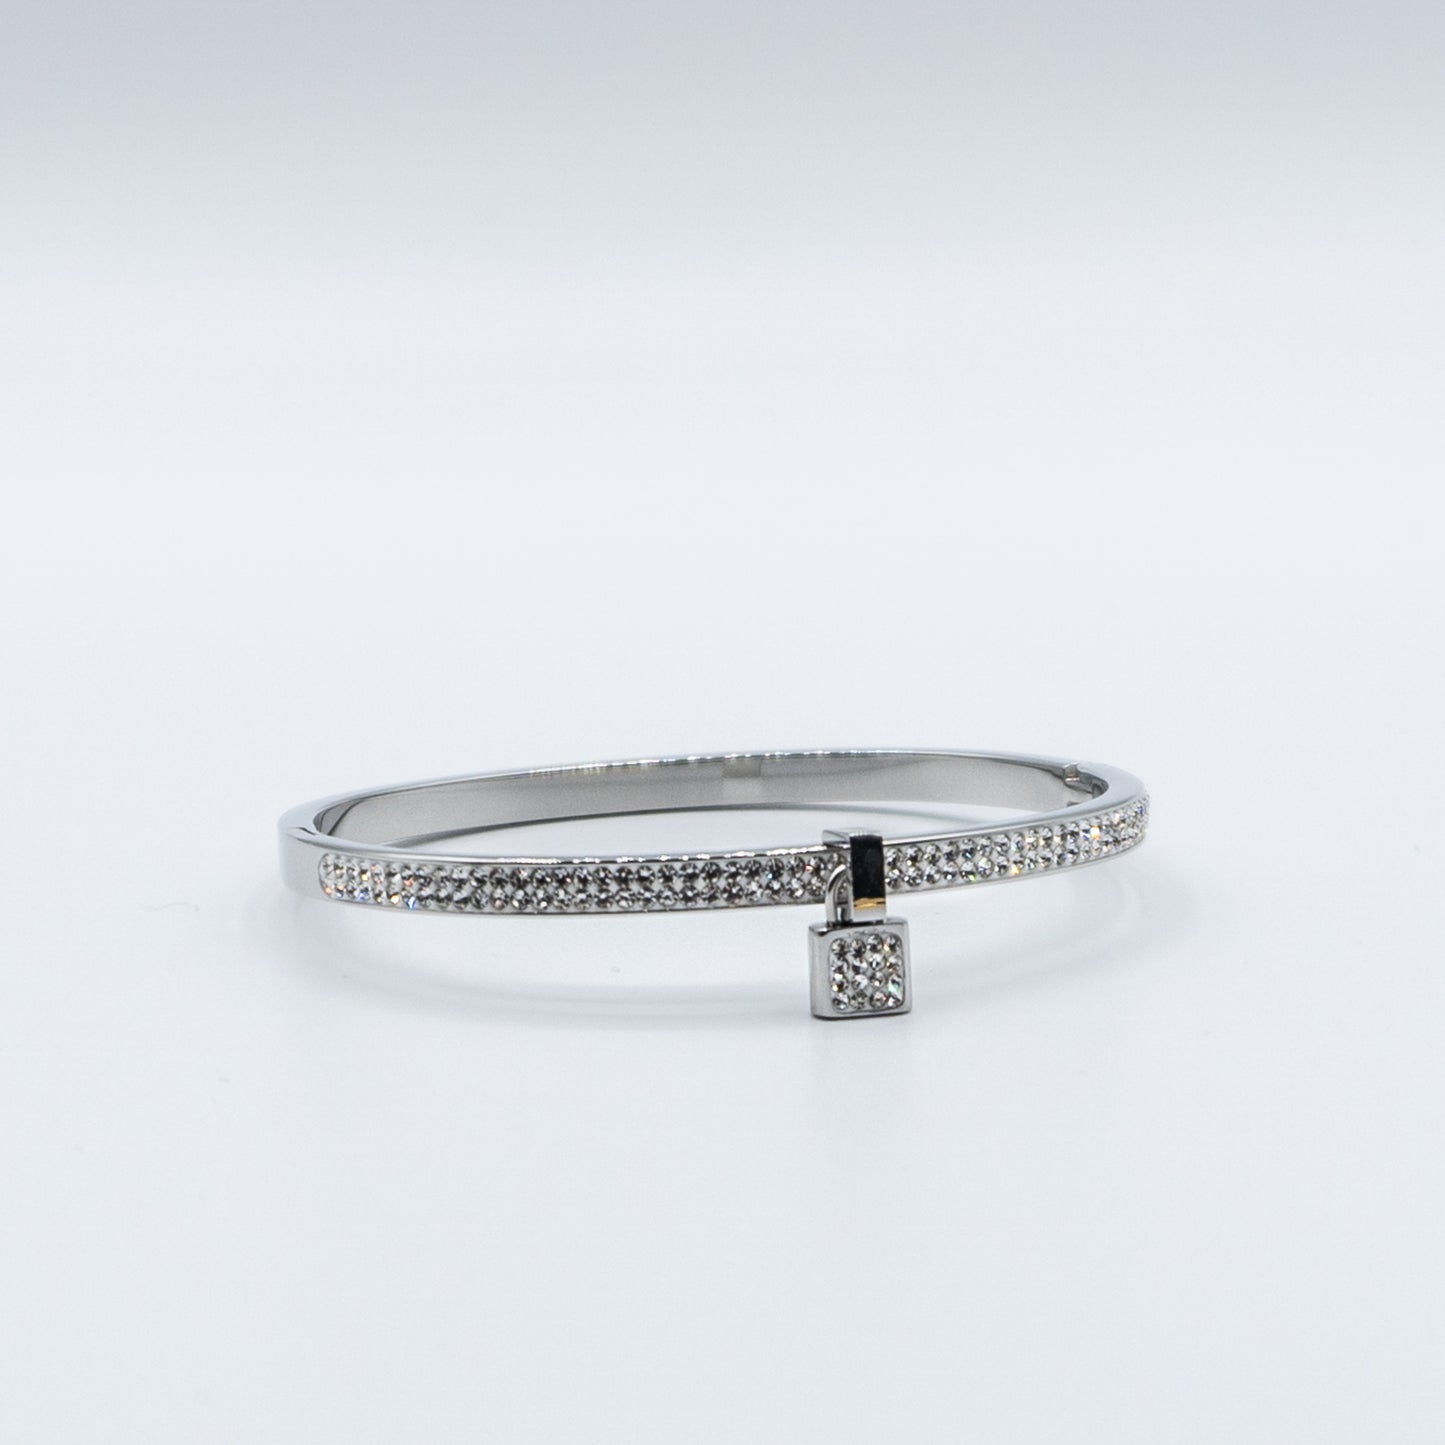 KEY - stainless steel bangle